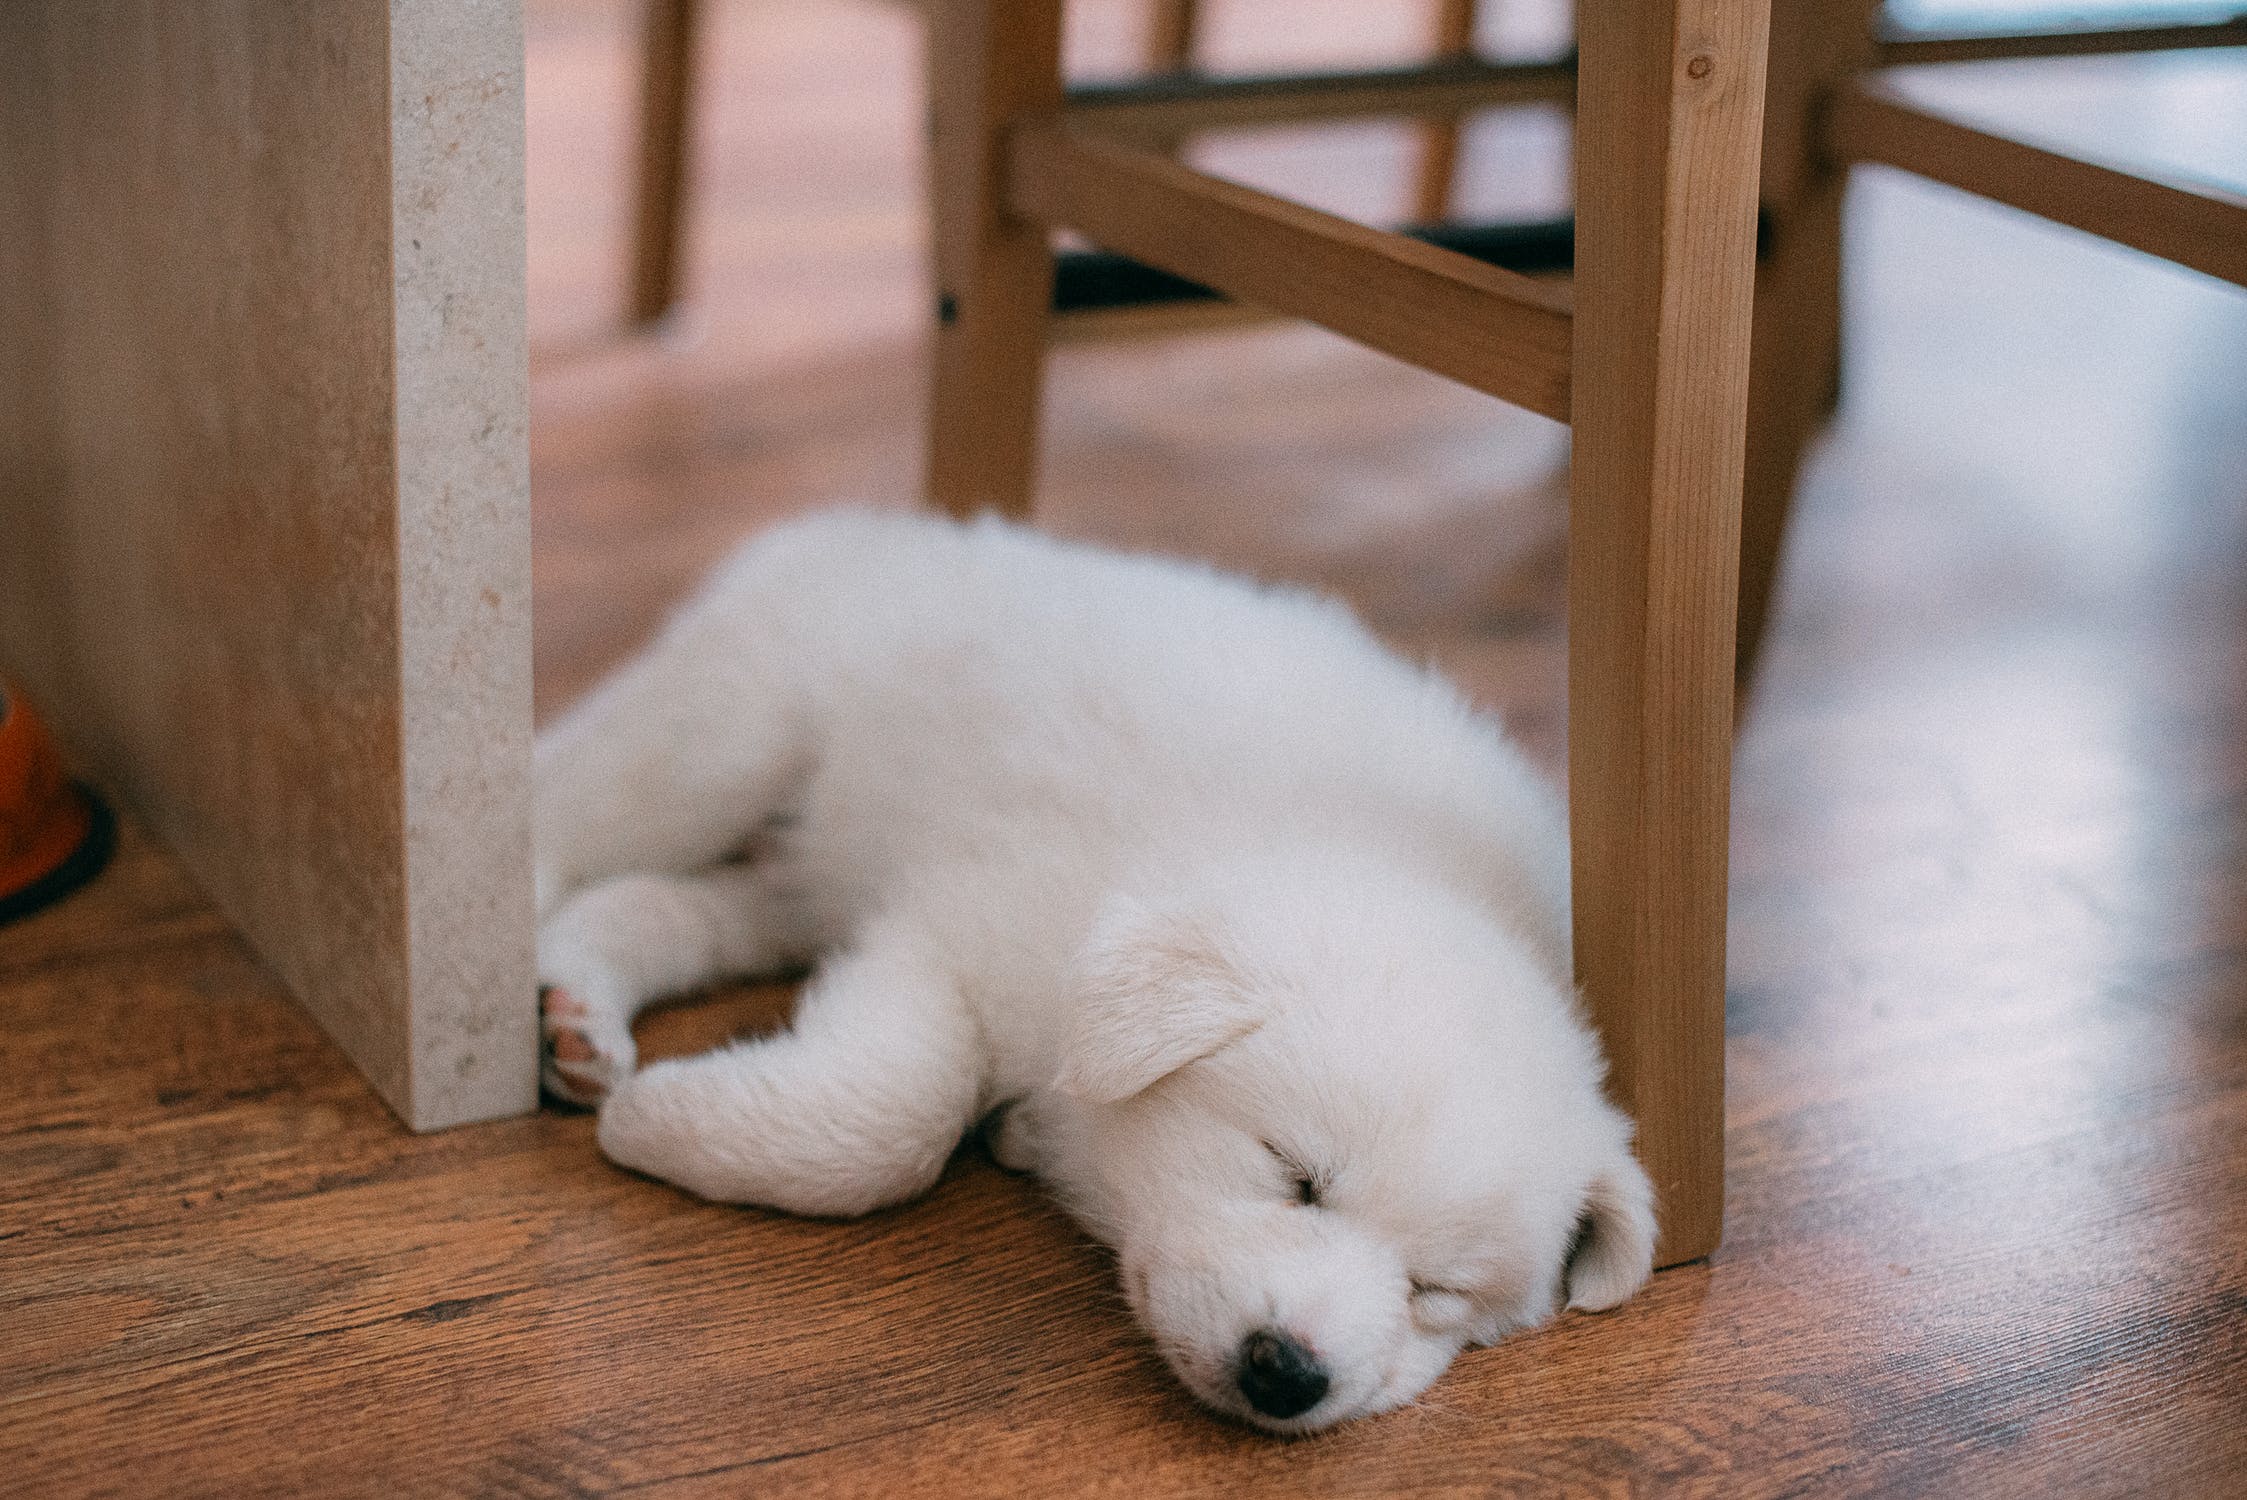 I saw a puppy through the window | Source: Pexels